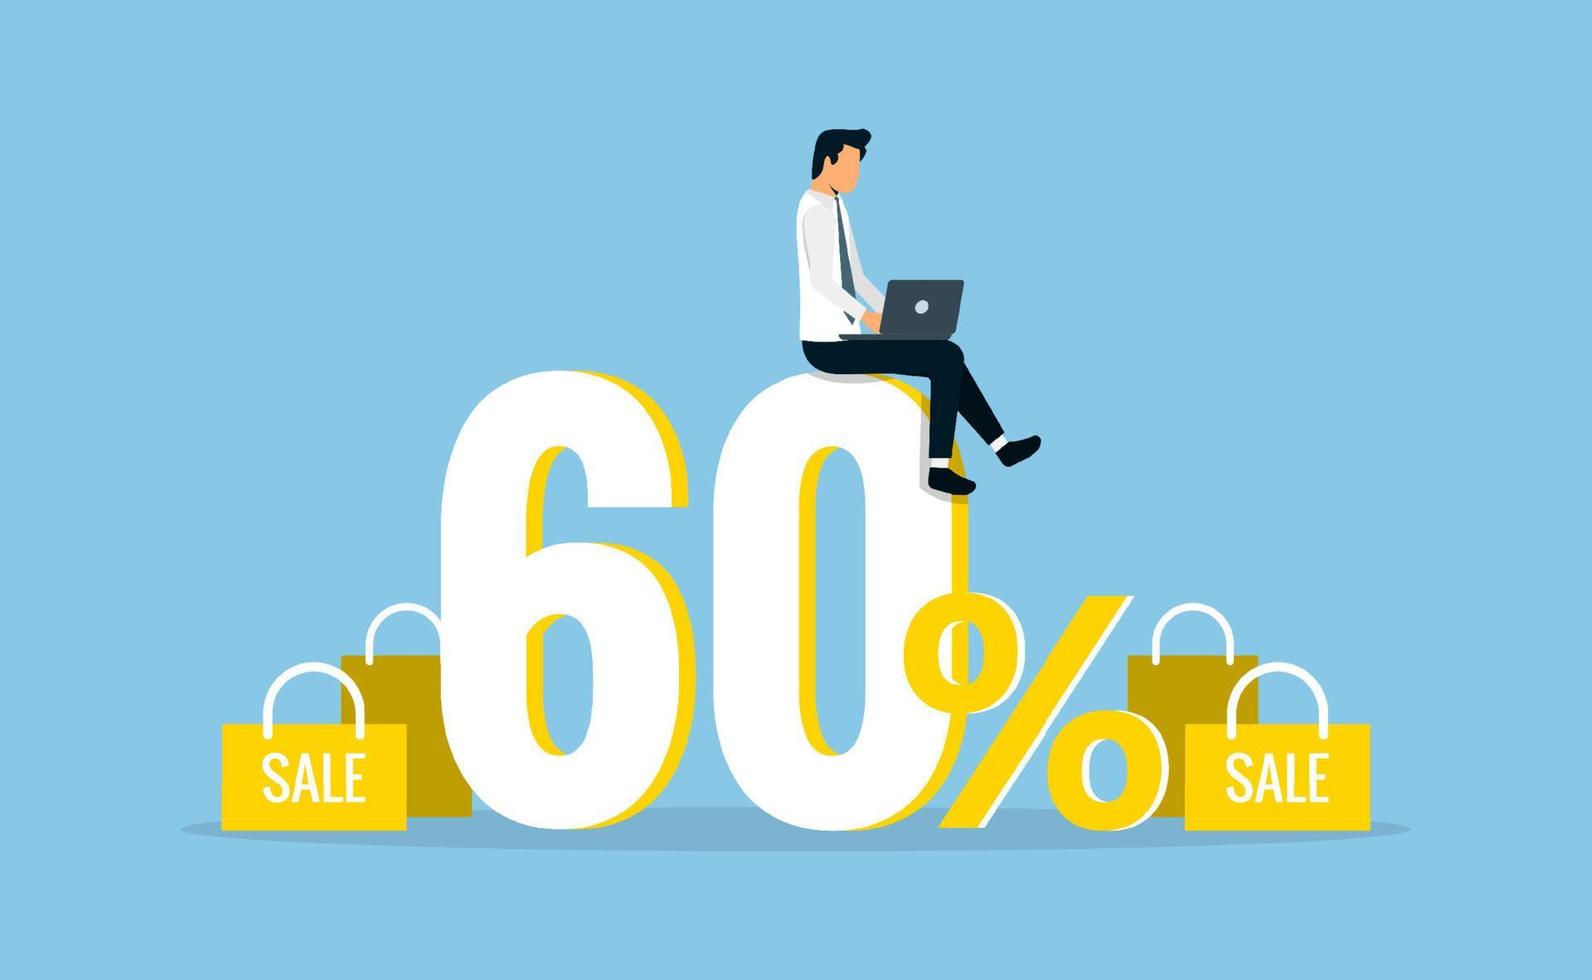 Online shopping activities, discount and promotion, flat vector illustration